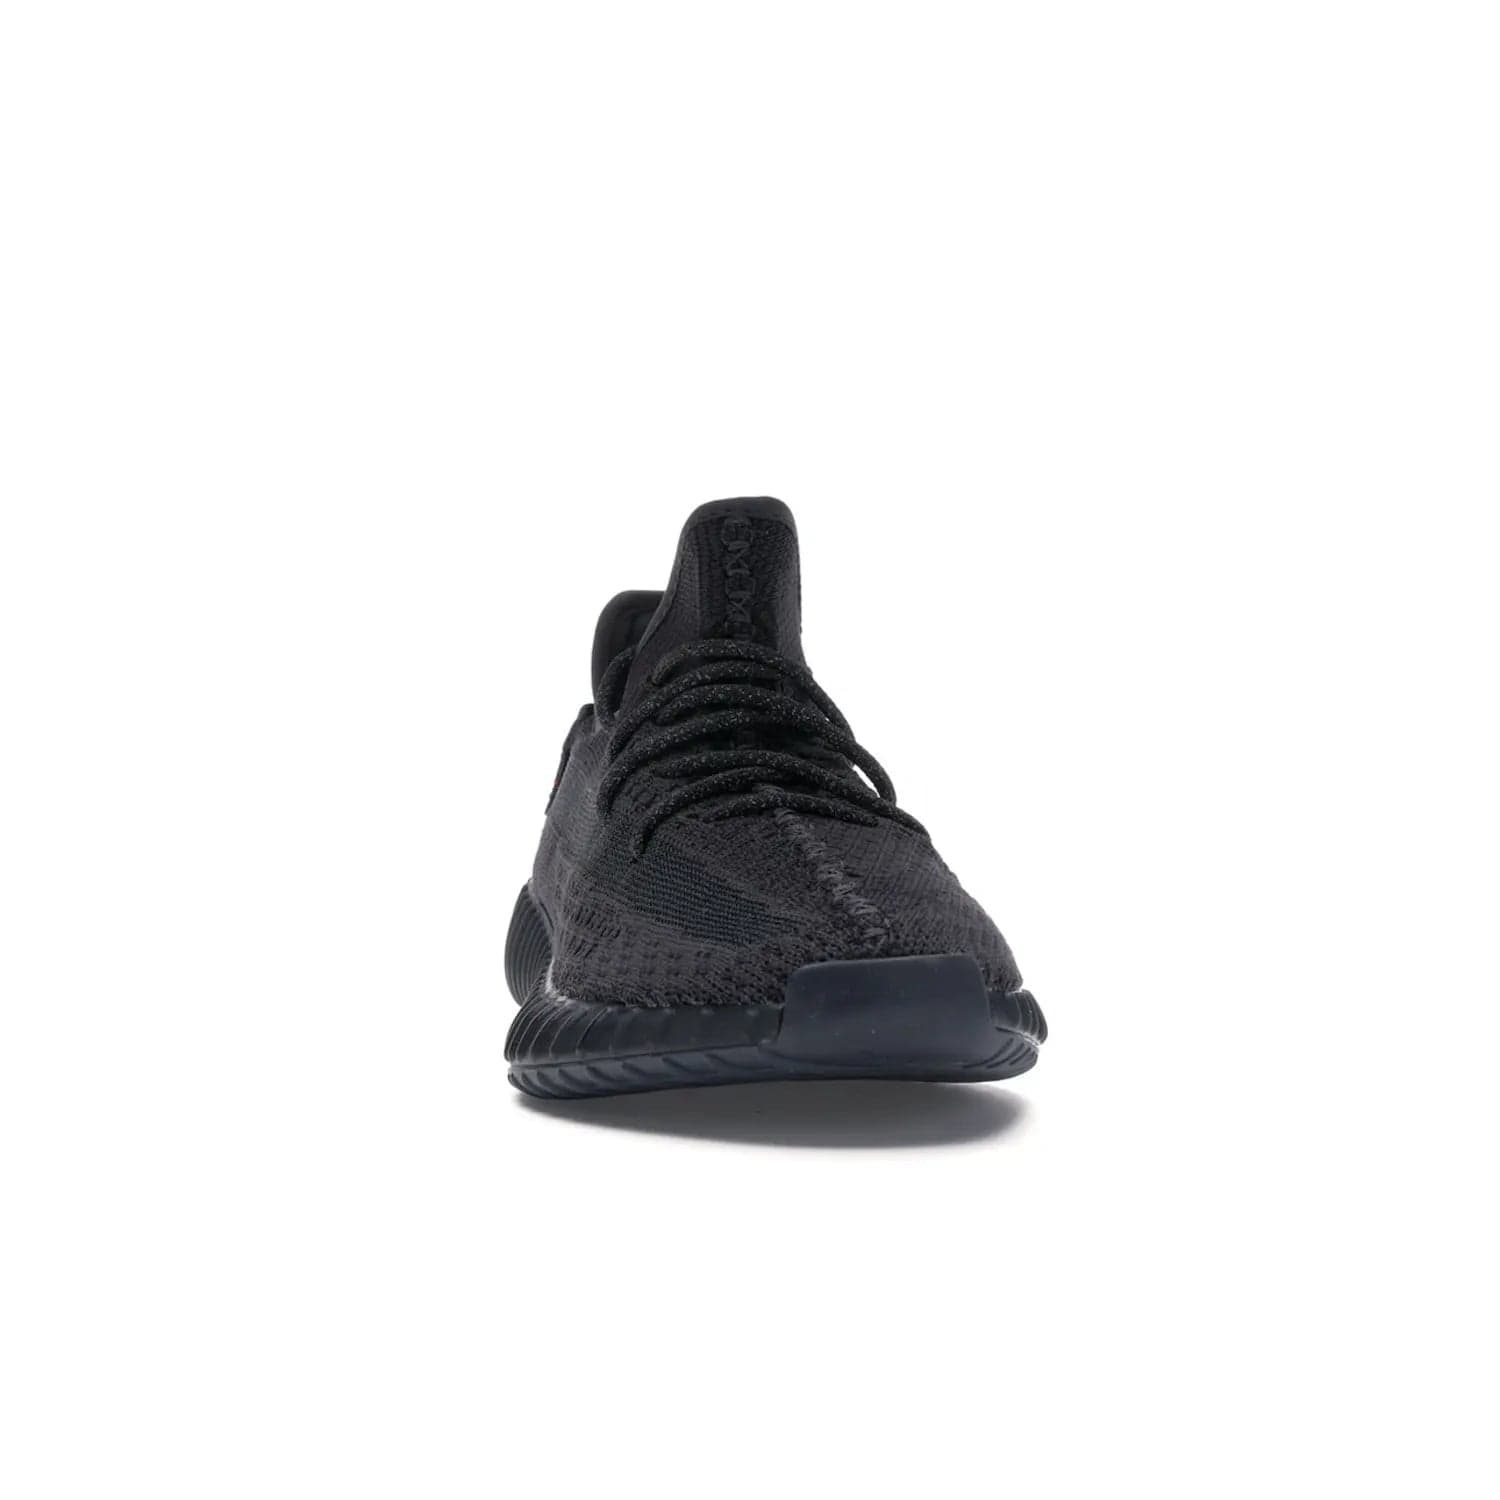 adidas Yeezy Boost 350 V2 Black (Non-Reflective) - Image 9 - Only at www.BallersClubKickz.com - A timeless, sleek silhouette crafted from quality materials. The adidas Yeezy Boost 350 V2 Black (Non-Reflective) brings style and sophistication. Get yours now!